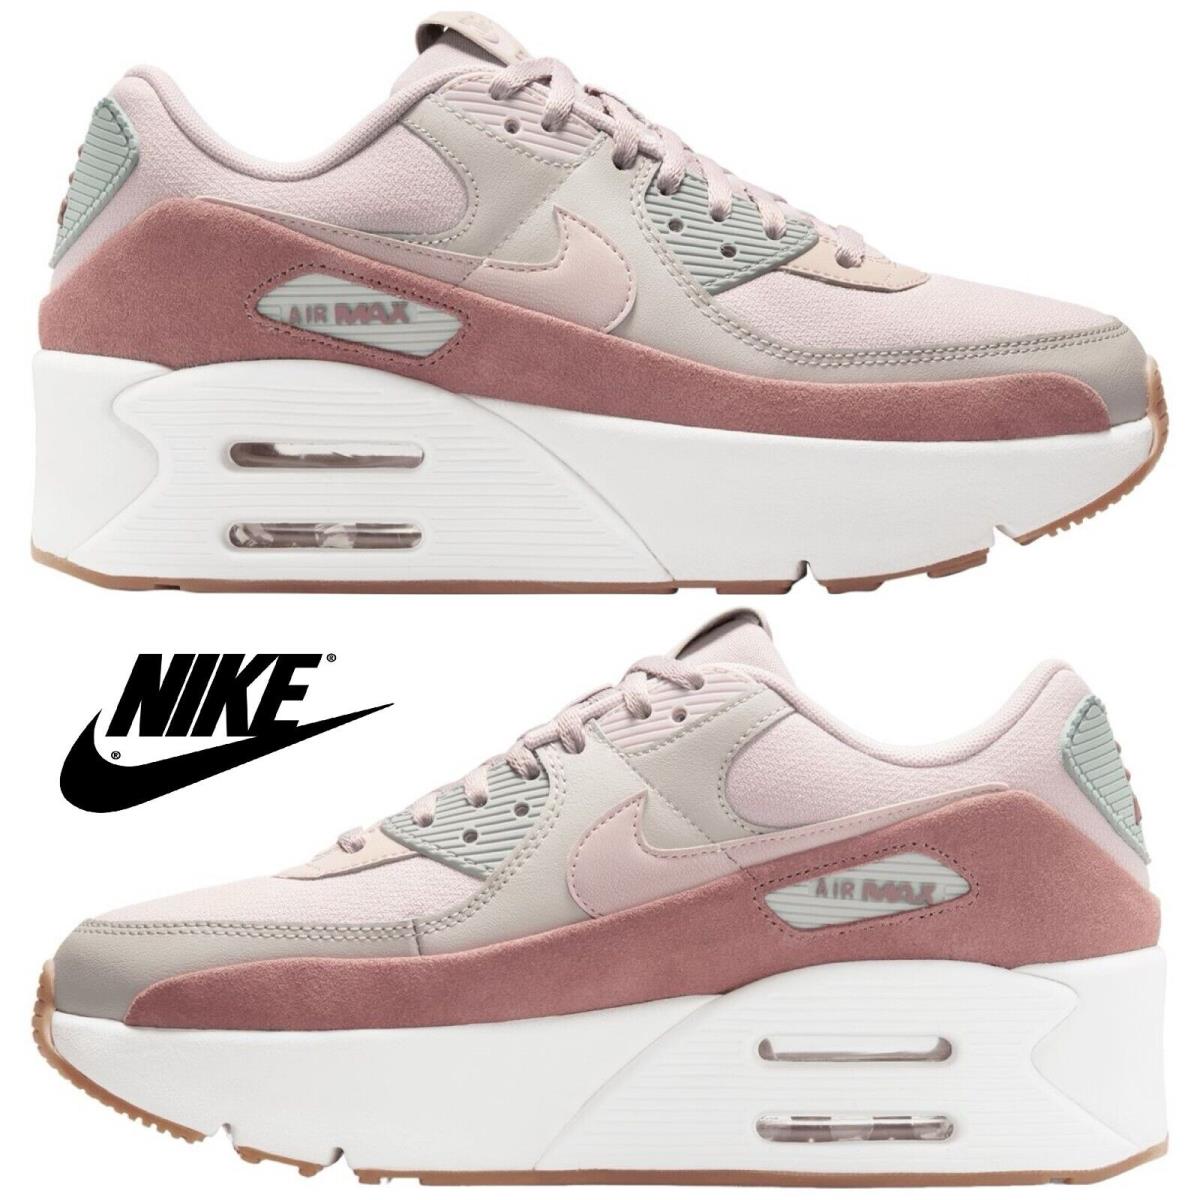 Nike Air Max 90 LV8 Women s Sneakers Casual Shoes Premium Running Sport Gym - Pink, Manufacturer: Light Iron Ore/Platinum Violet